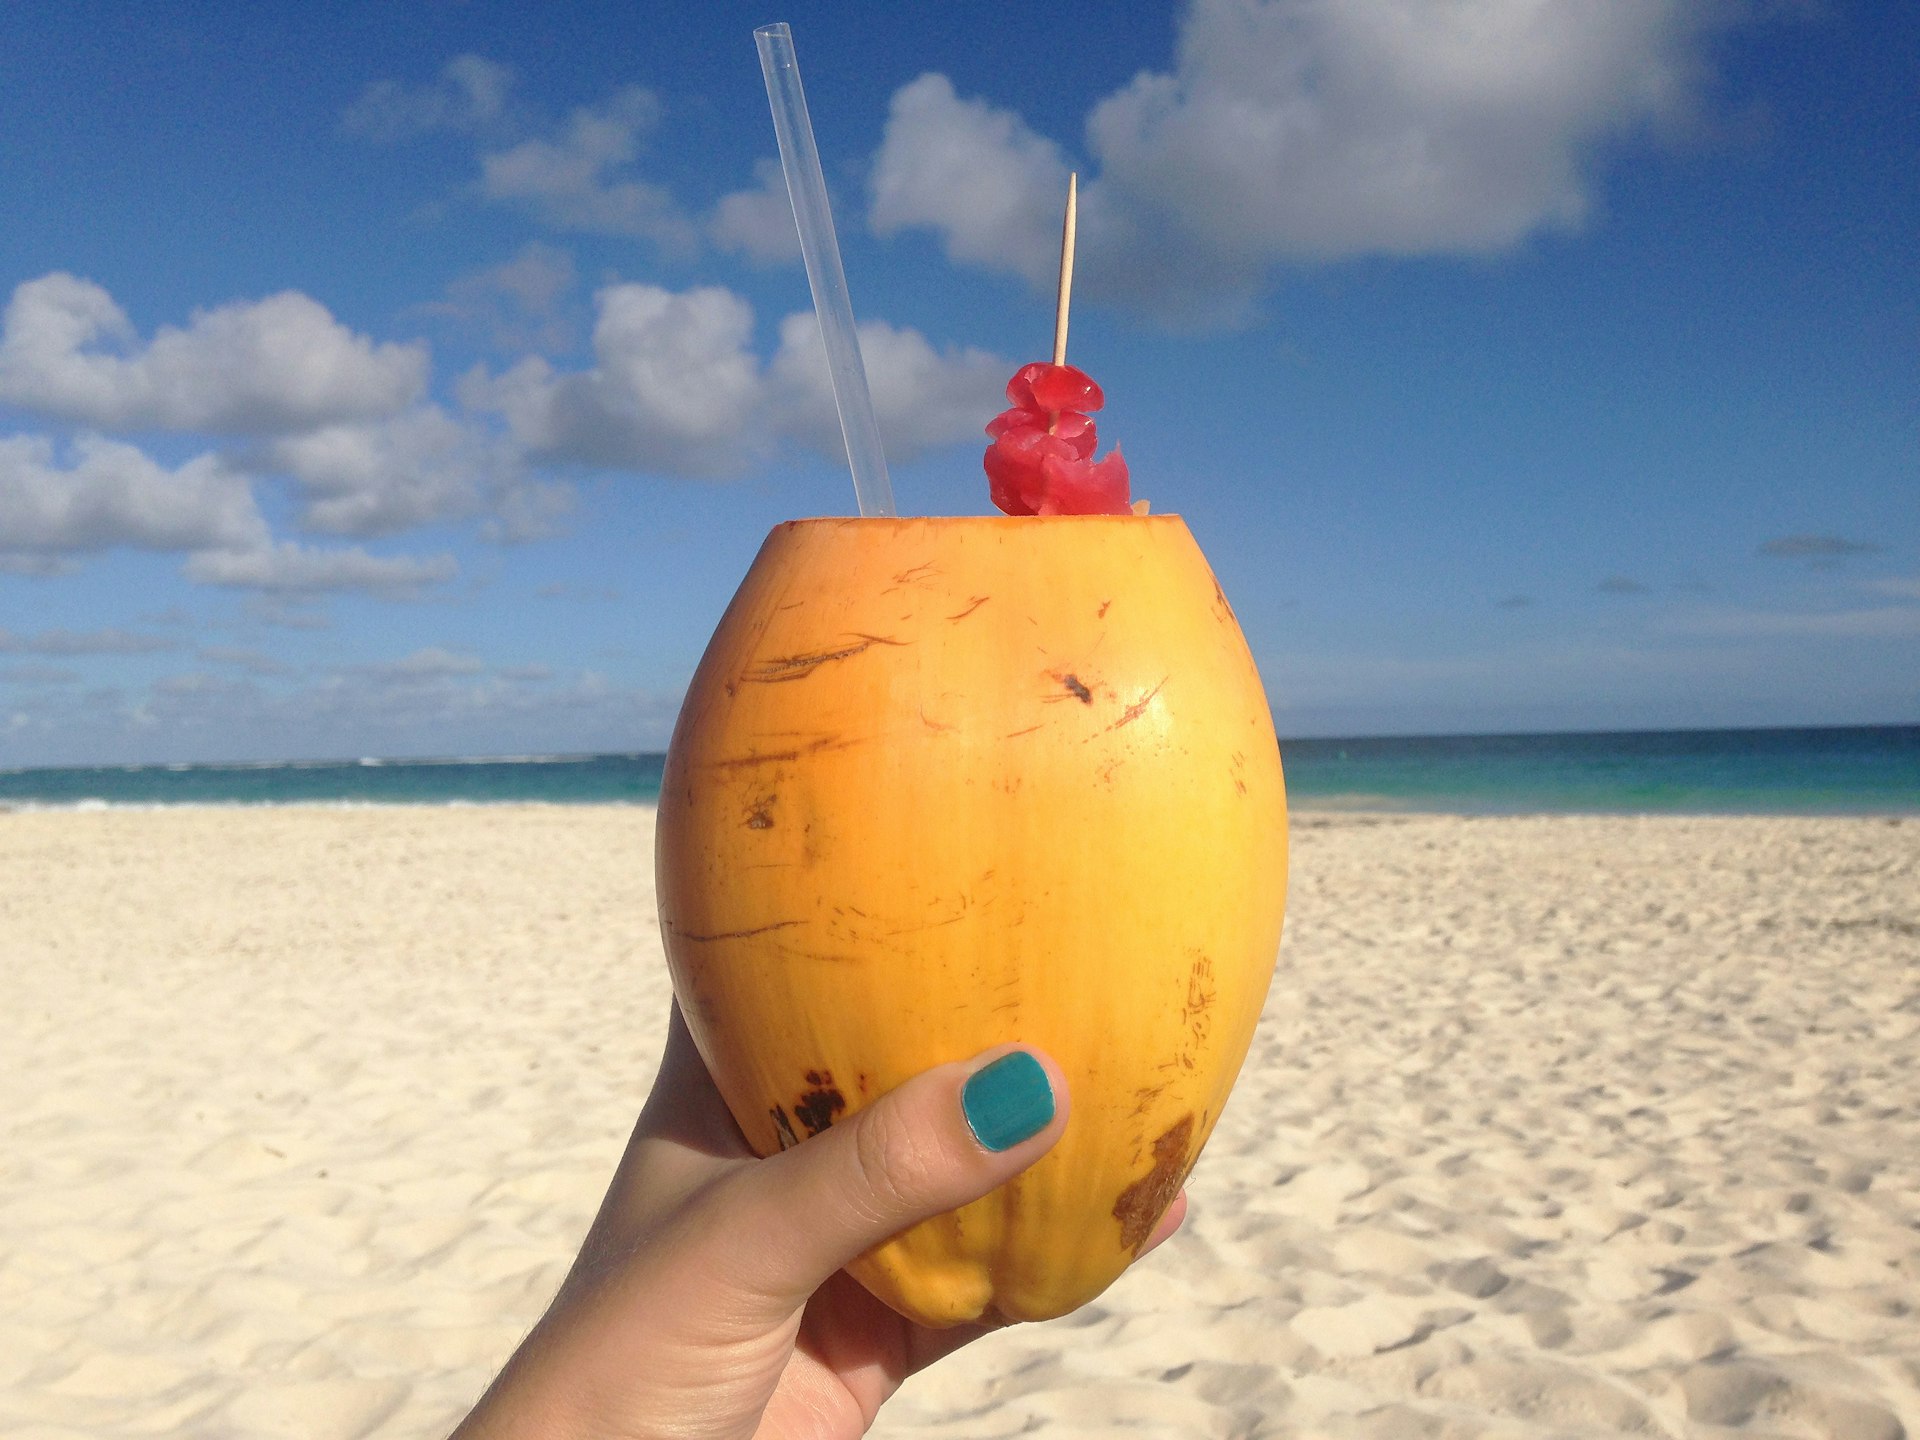 Coconut rum cocktail served on the beach in Barbados. Image by Sarah Reid / Lonely Planet